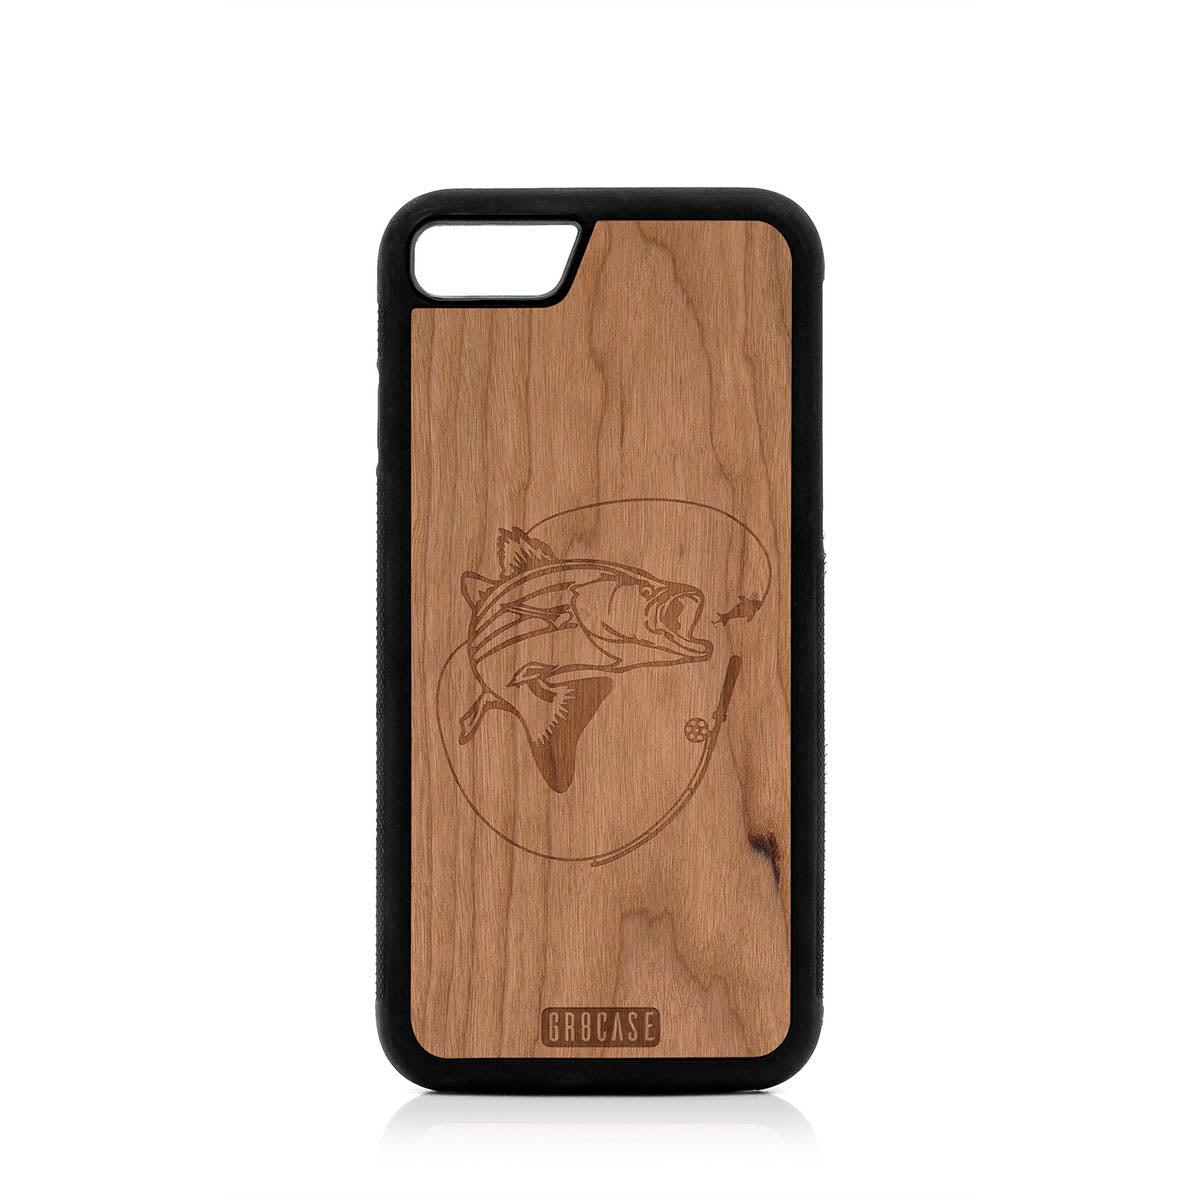 Fish and Reel Design Wood Case For iPhone SE 2020 by GR8CASE